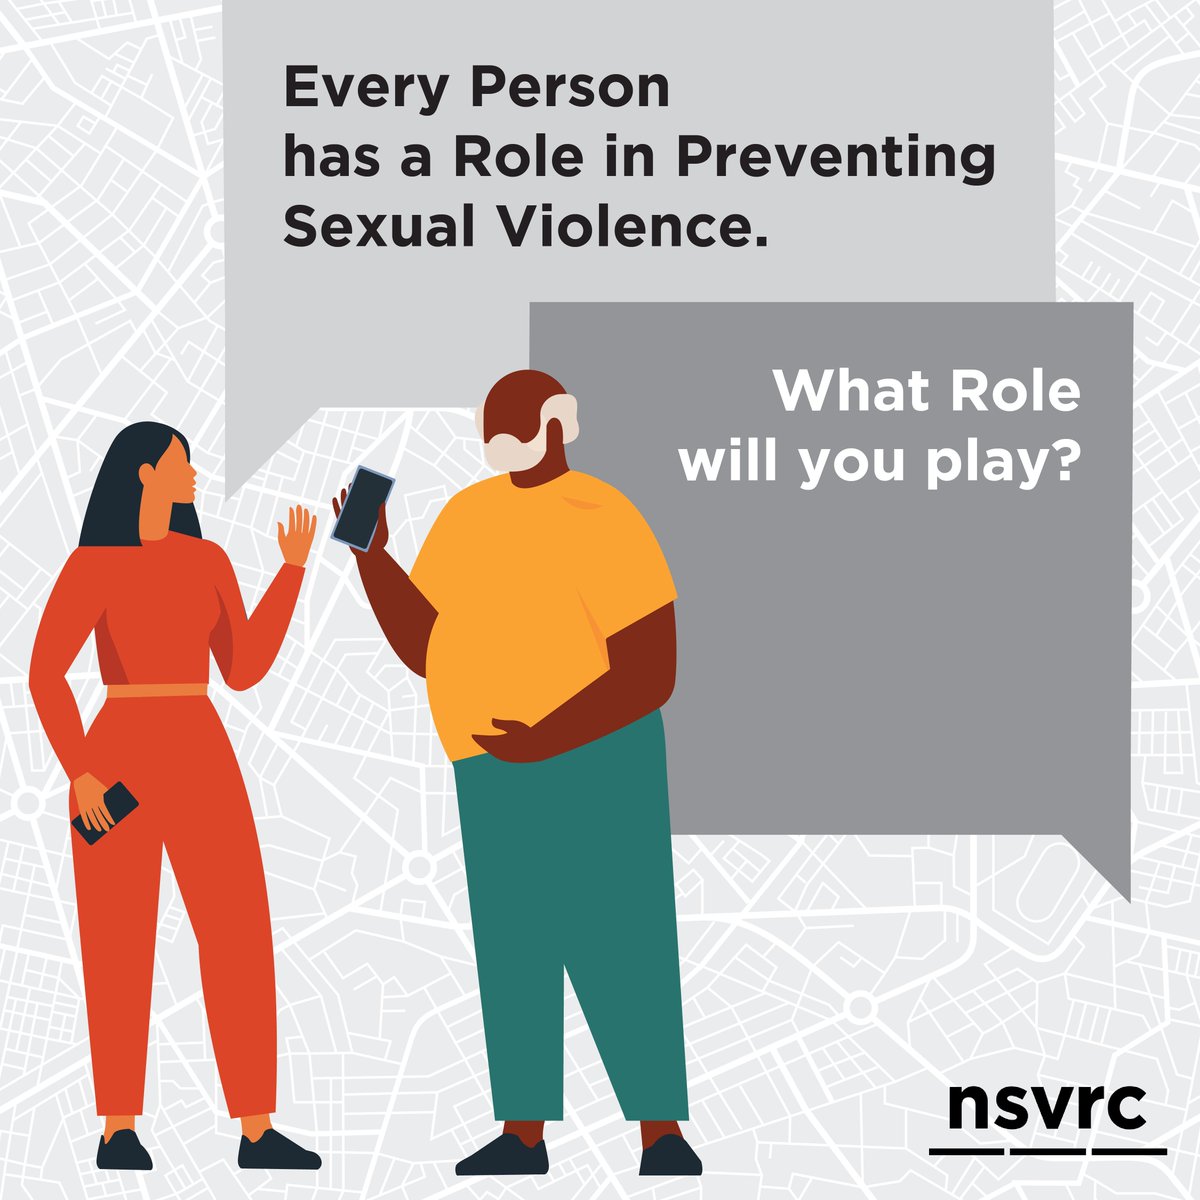 Now that you know more about the problem of sexual violence, what is one way YOU can help? #SAAM24 #ConnectedCommunities